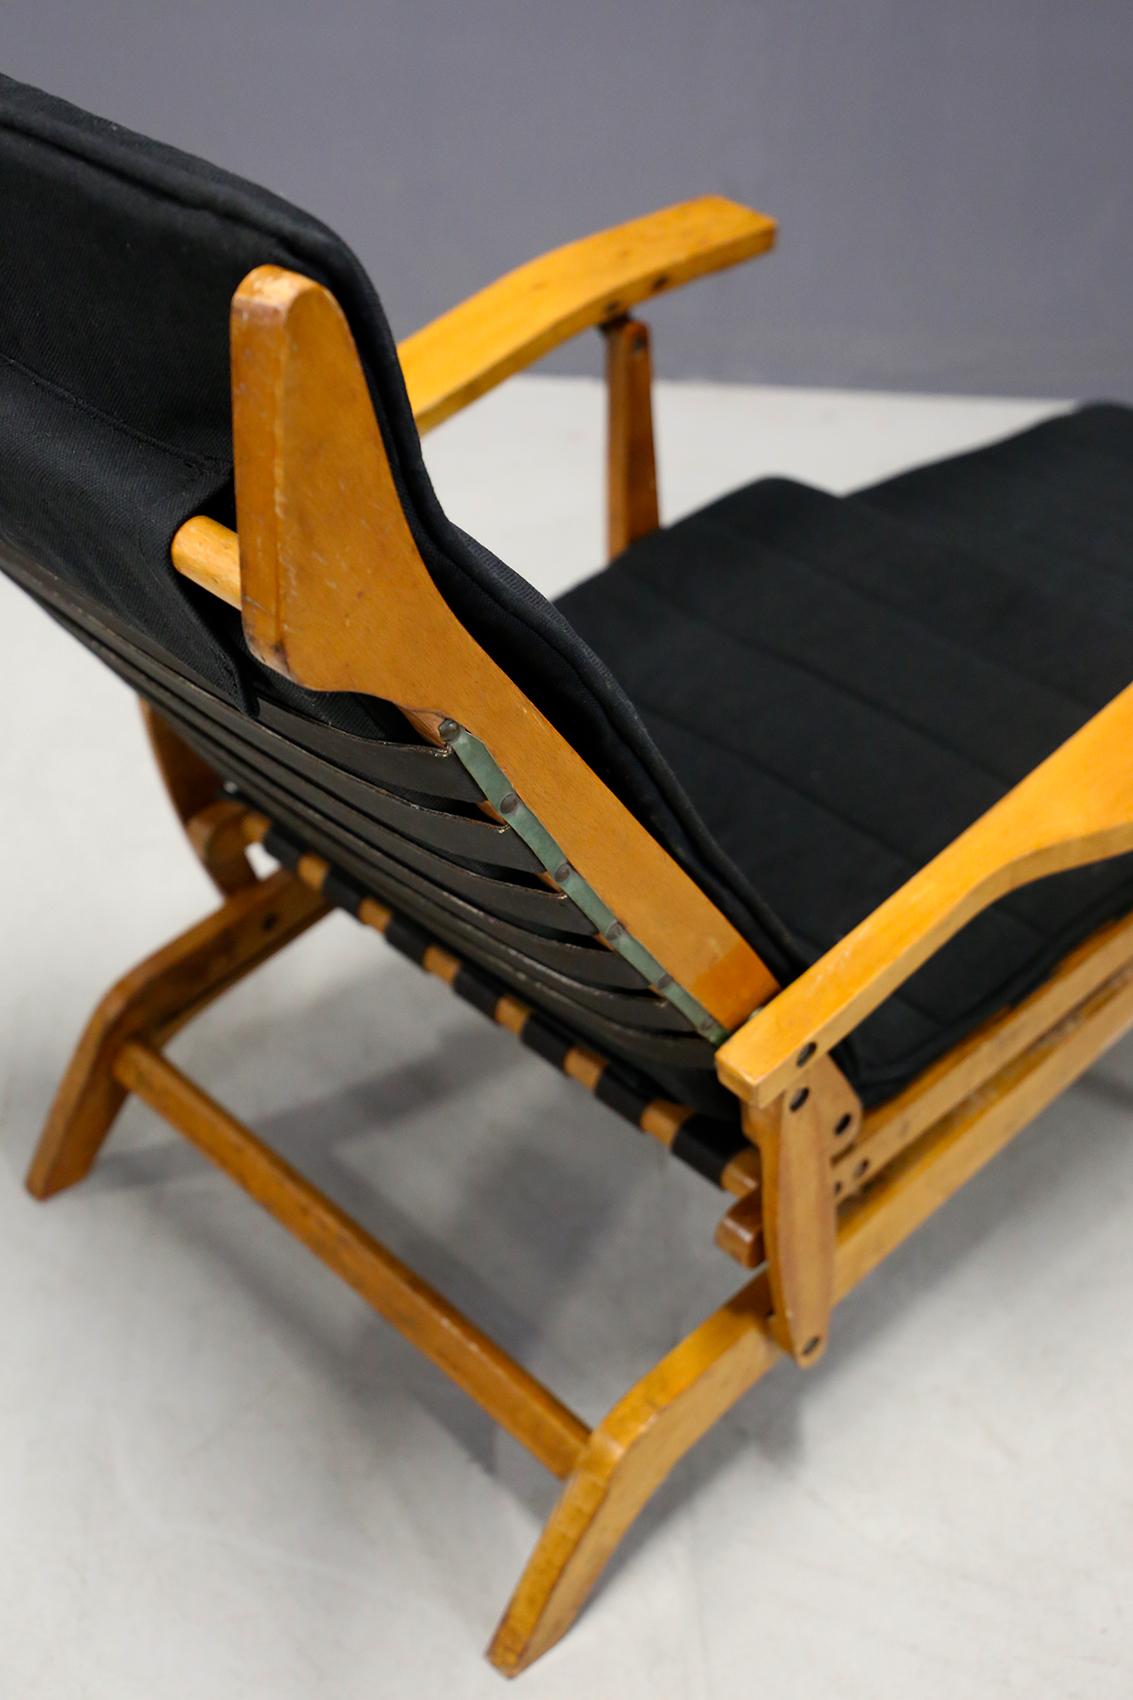 Italian Pair of Midcentury Lounge Chairs Attributed to Studio BBPR from 1950s